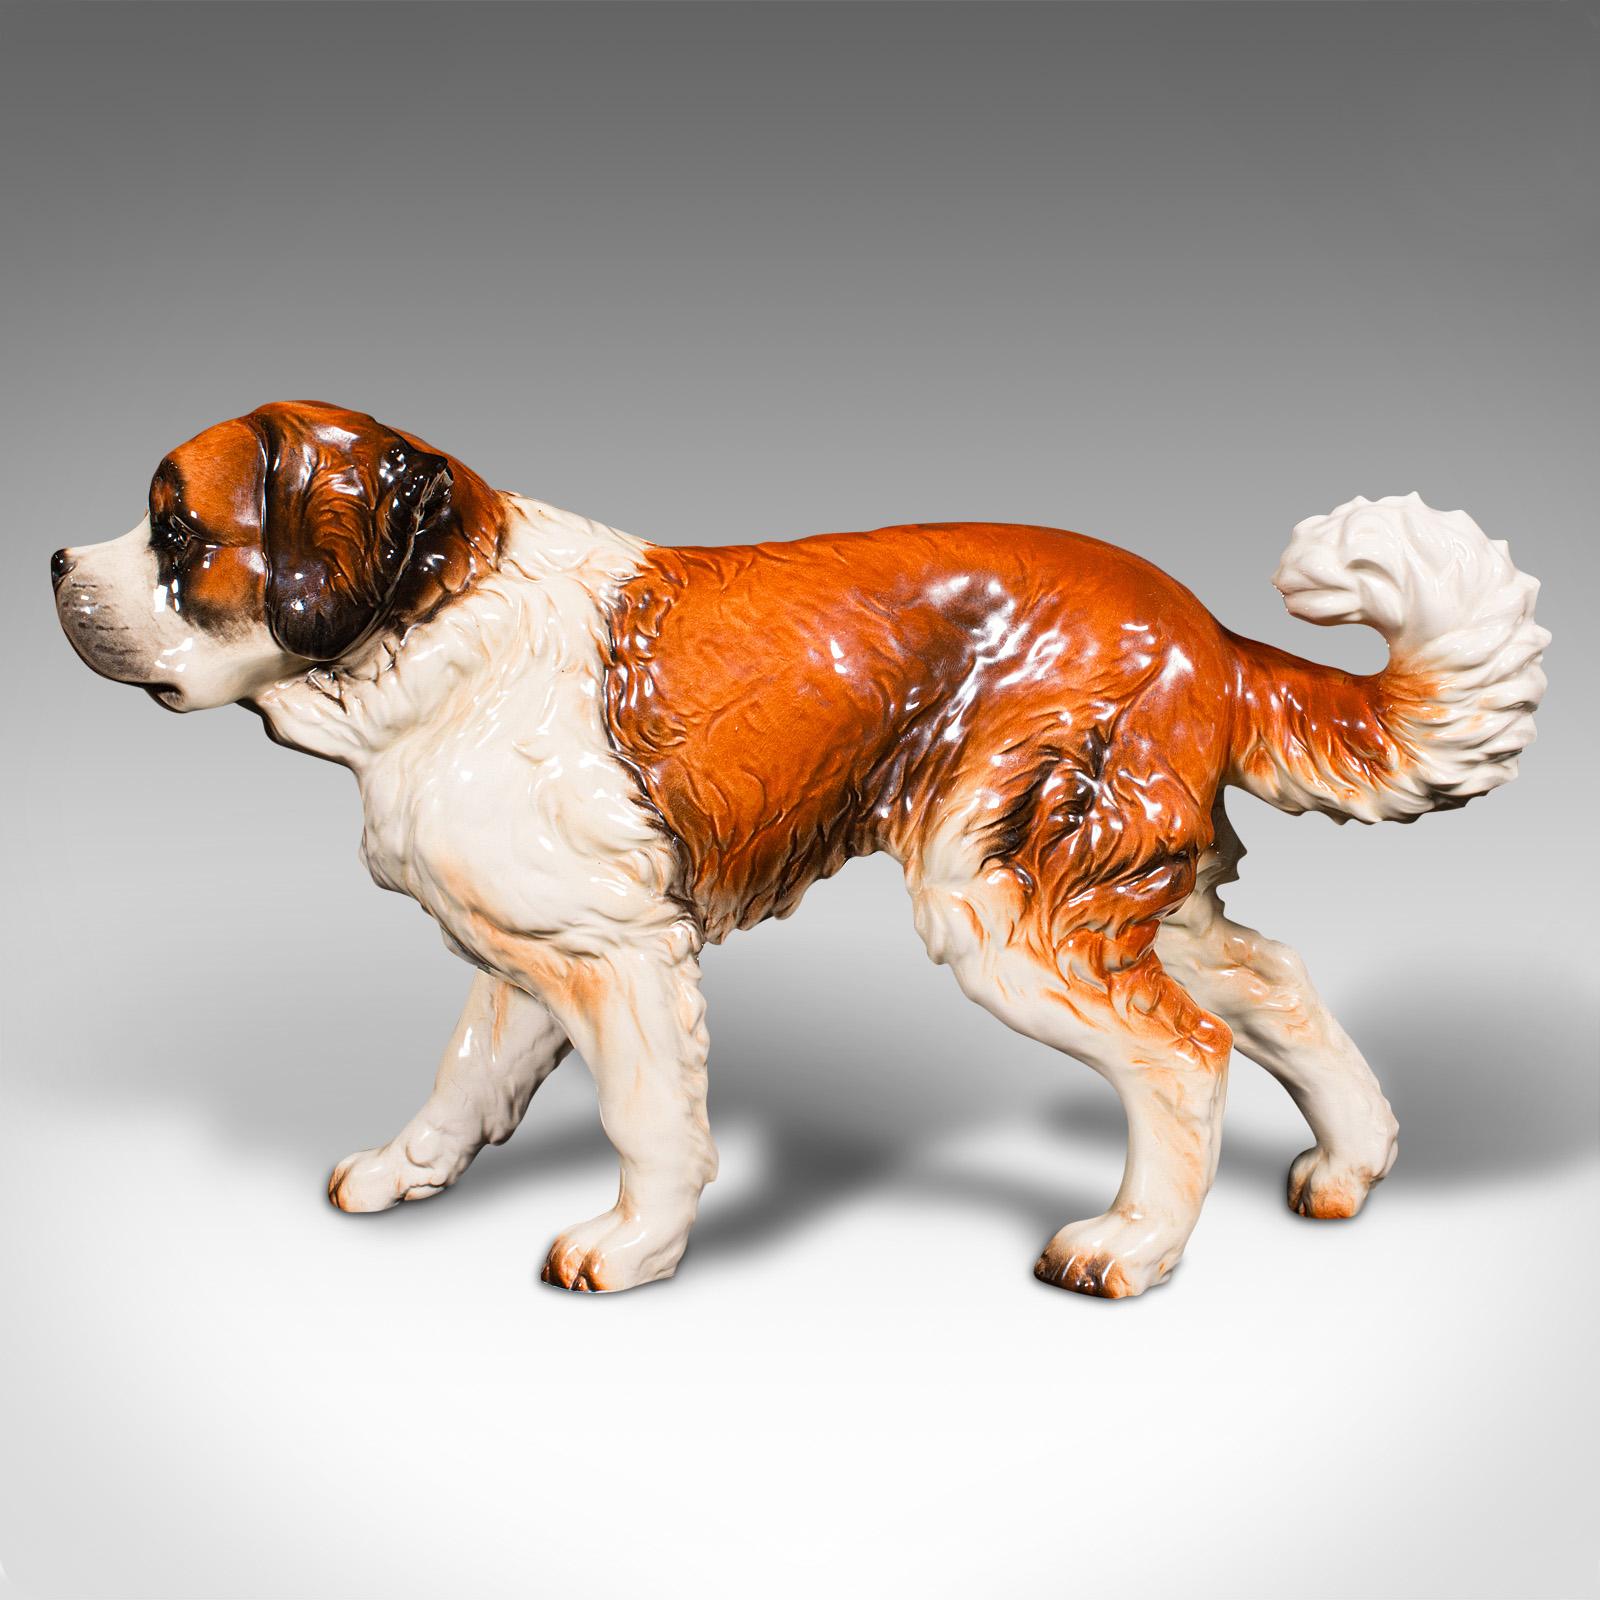 This is a large vintage St Bernard figure. A German, ceramic ornamental dog statue, dating to the late 20th century, circa 1980.

Utterly endearing ornamental study of the famous breed
Displays a desirable aged patina and in very good